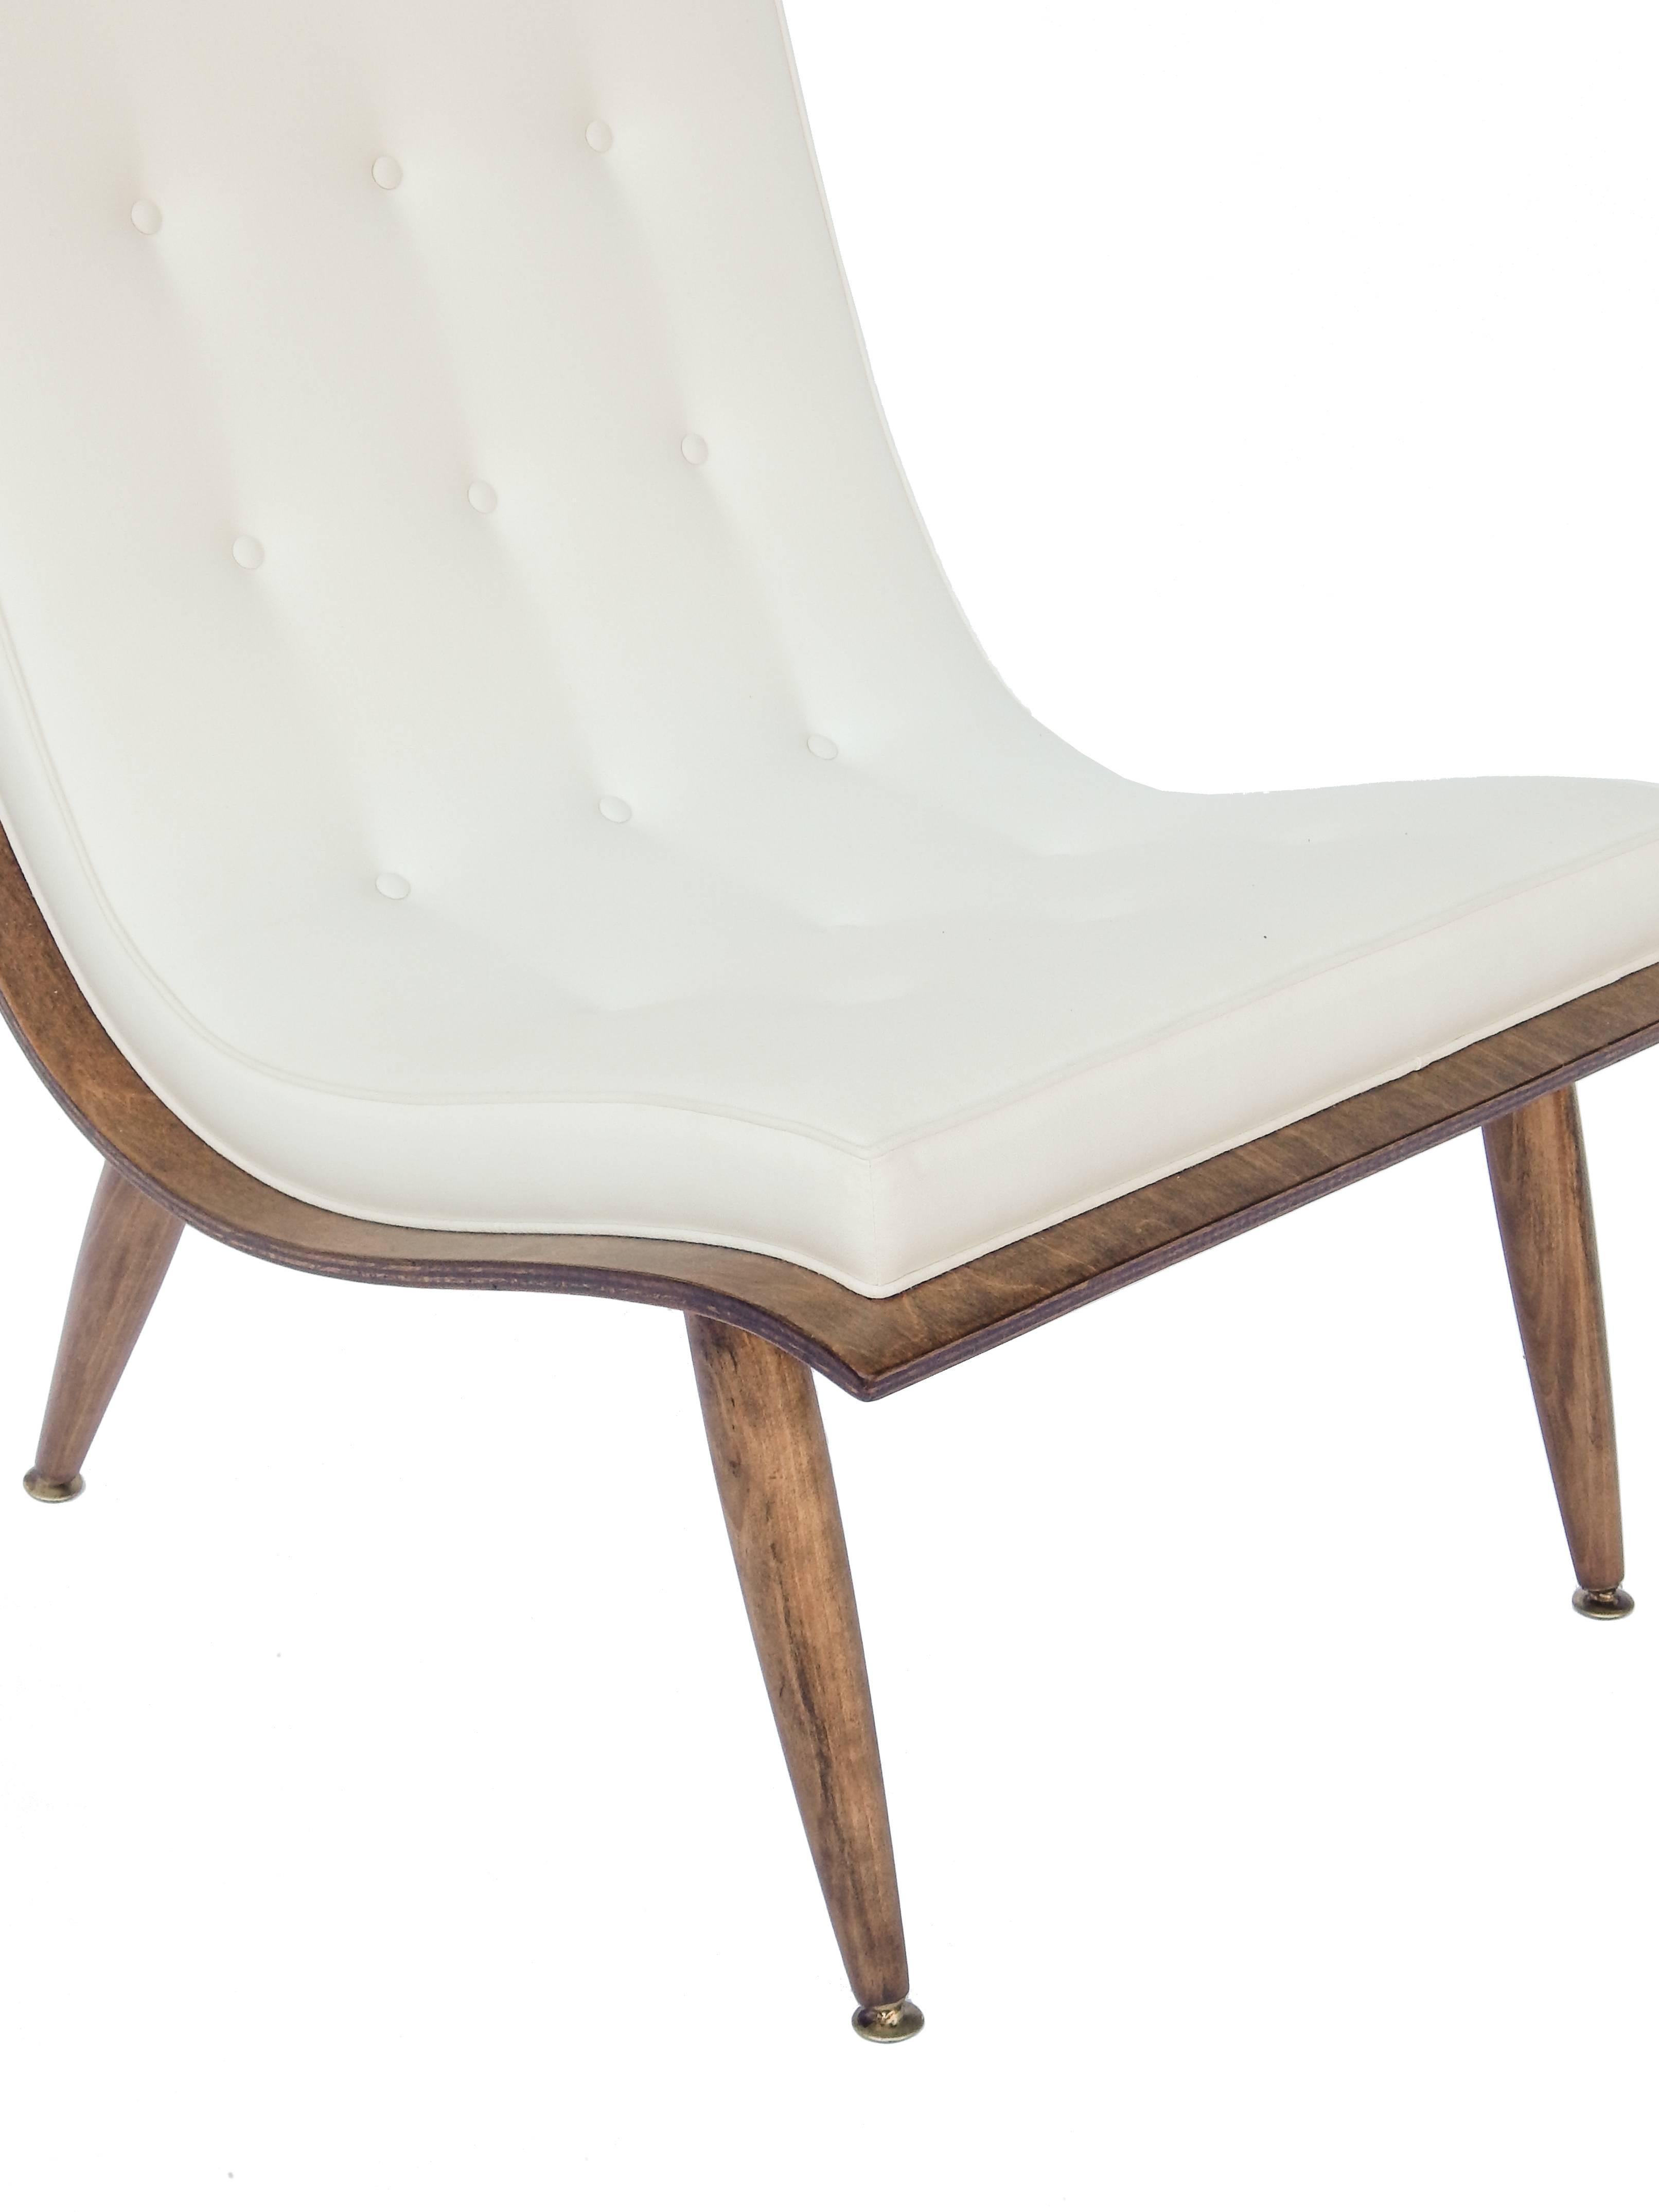 Pair of Carter Brothers Scoop Chairs In Excellent Condition For Sale In Bridgehampton, NY